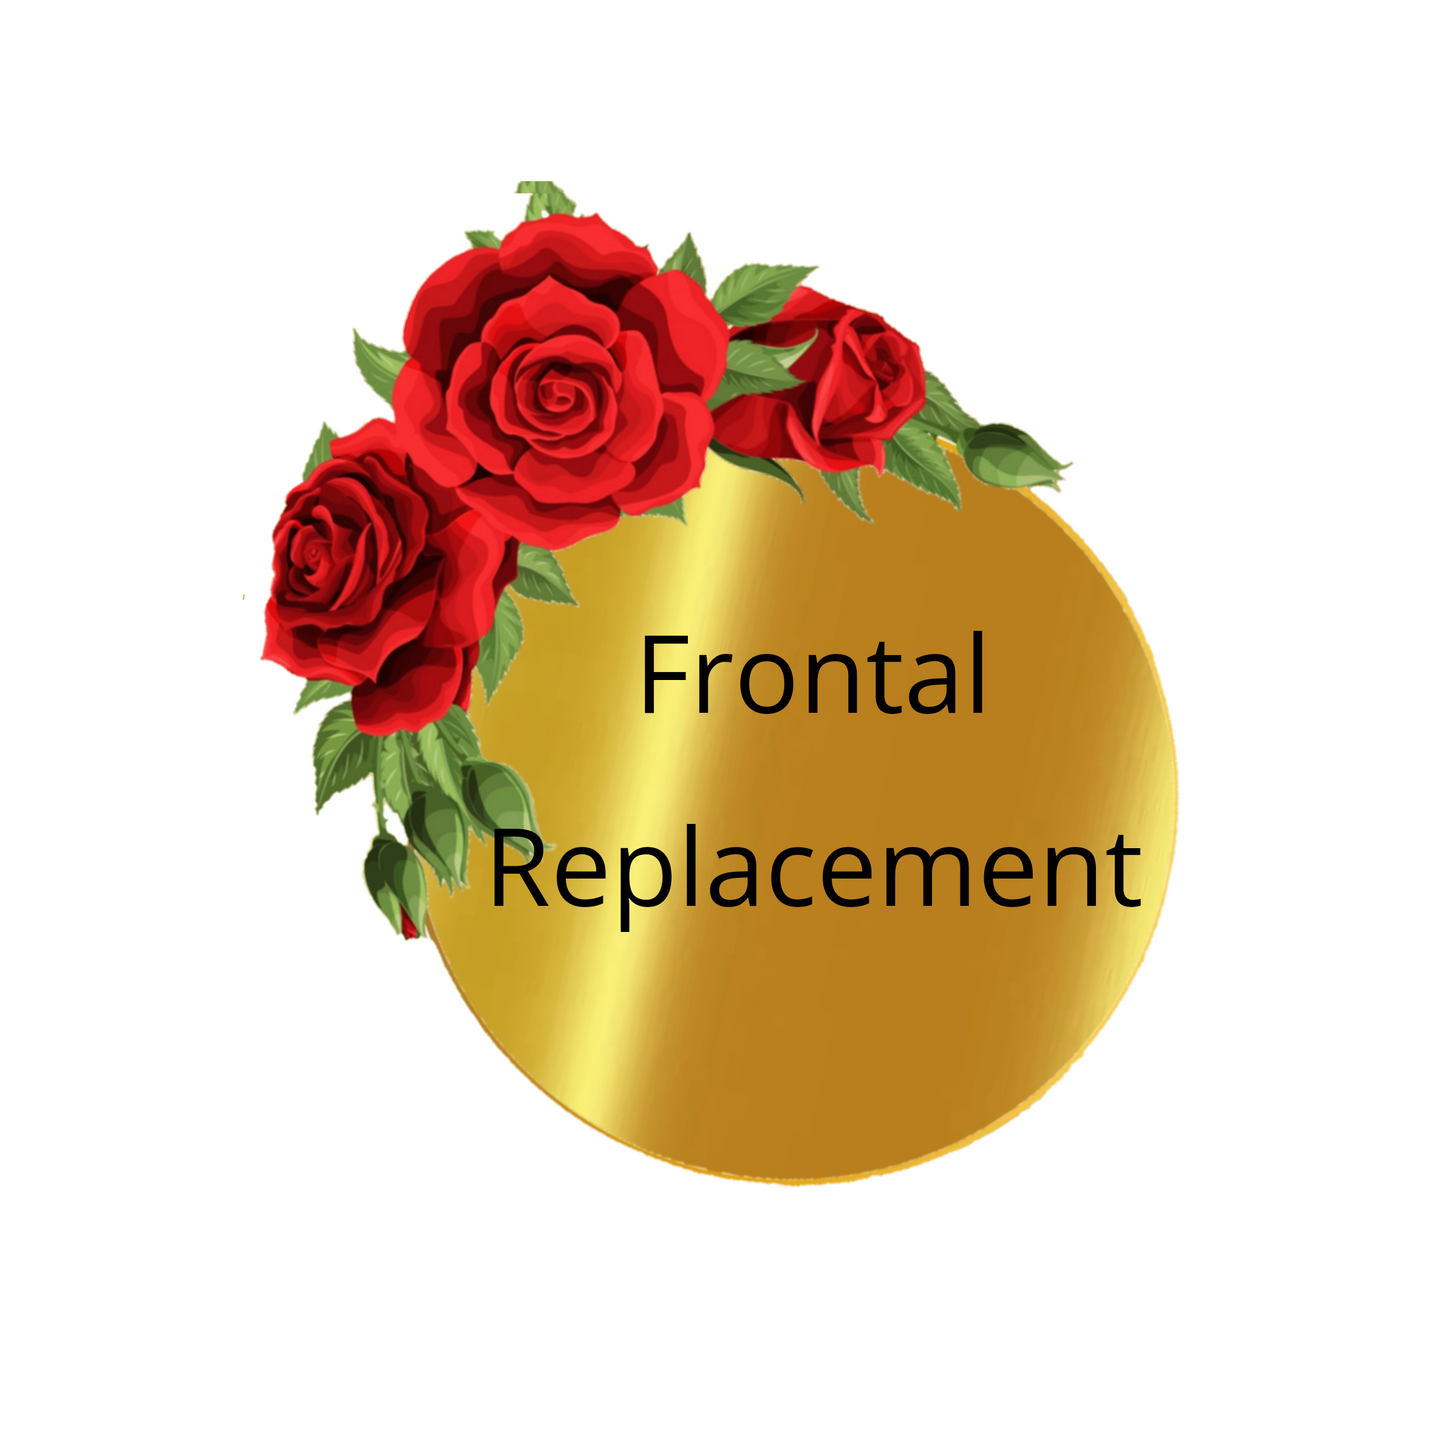 Frontal Replacement